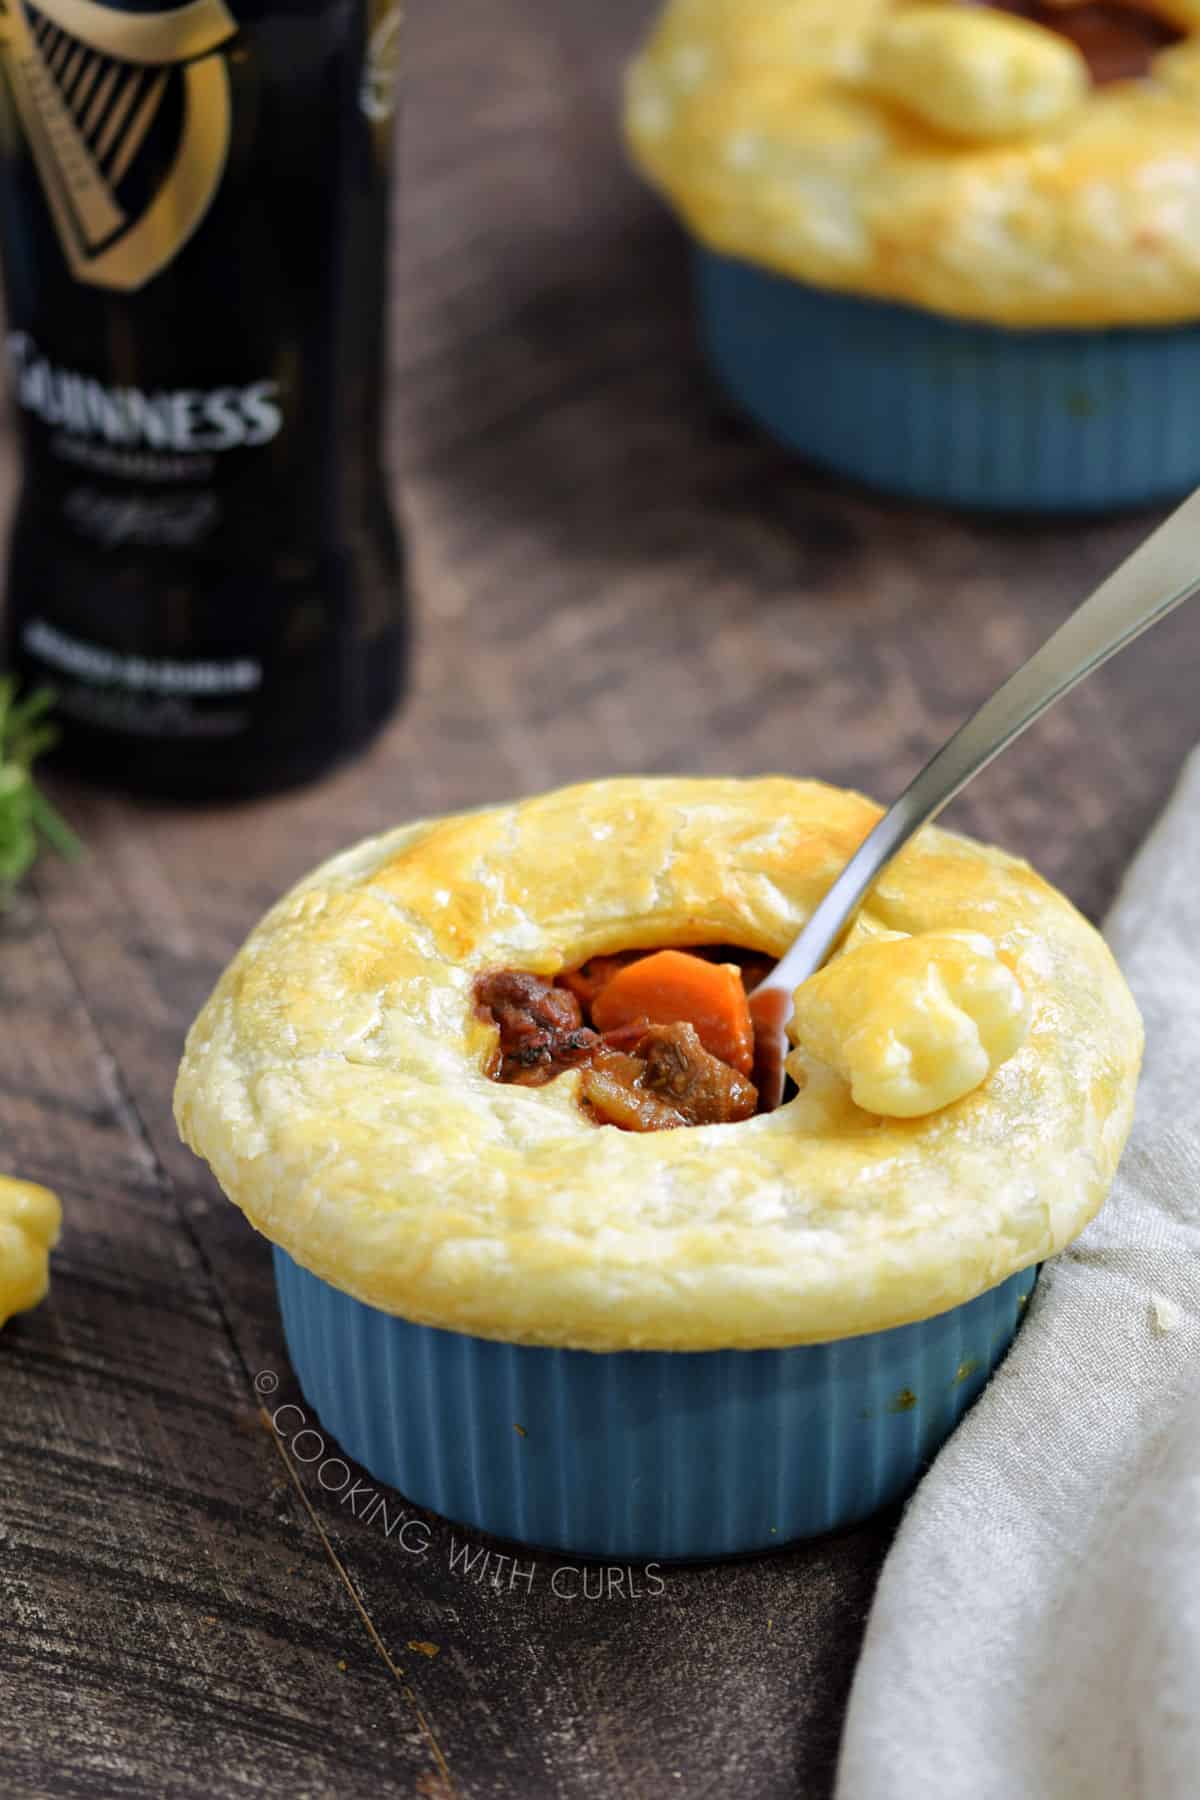 Puff pastry topped beef stew in a blue ramekin with a bottle of Guinness and a beige napkin in the background.